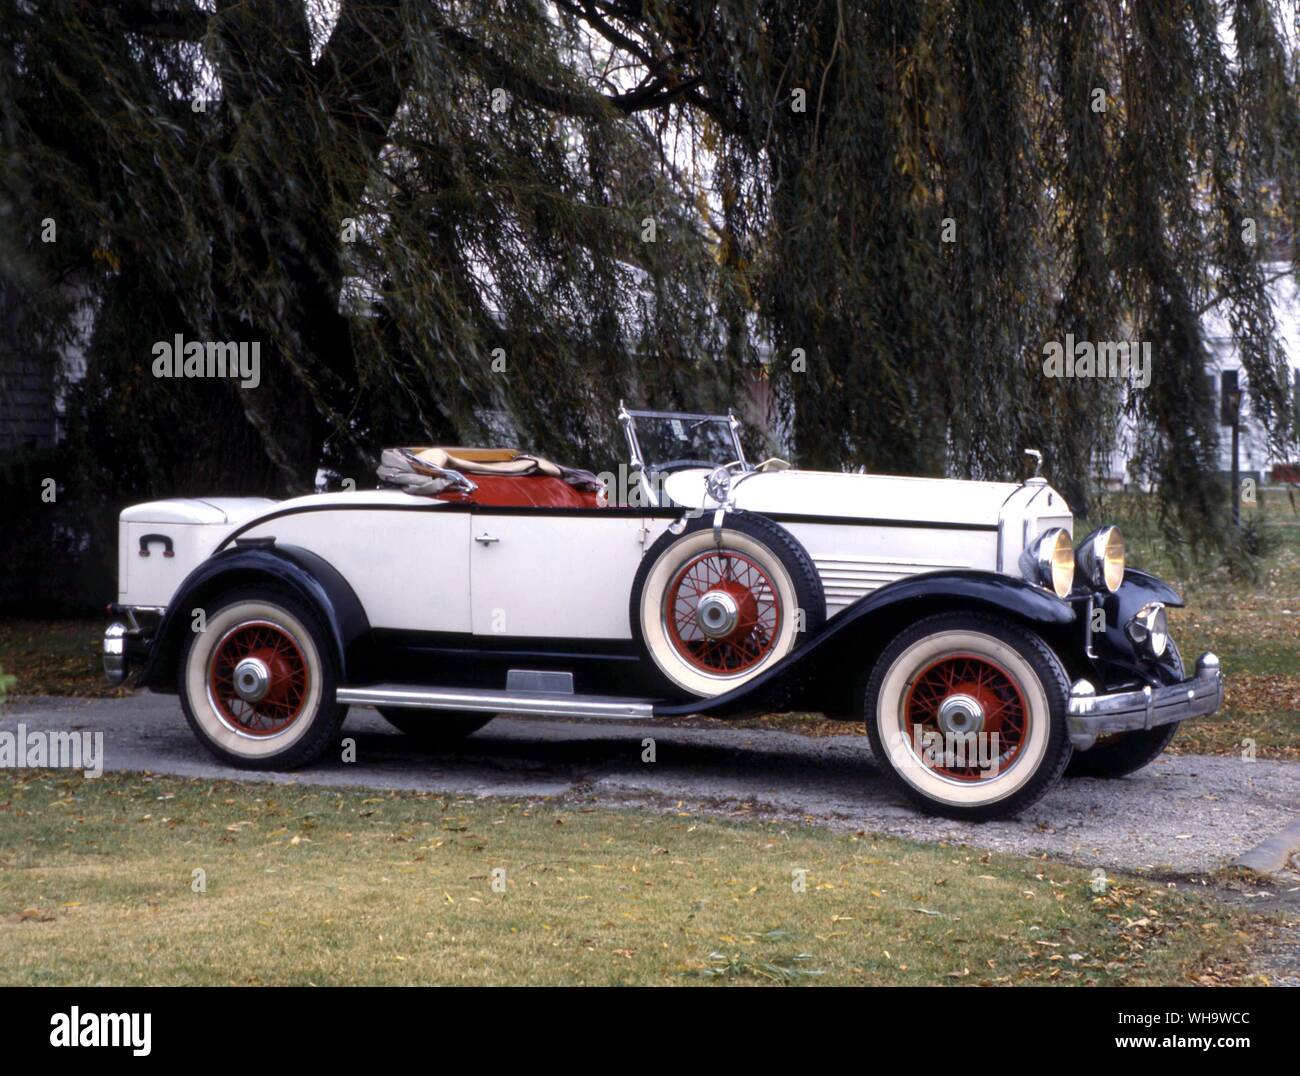 An outstanding model from Moon was the 1929 hite Prince of Windsor straight-eight Stock Photo